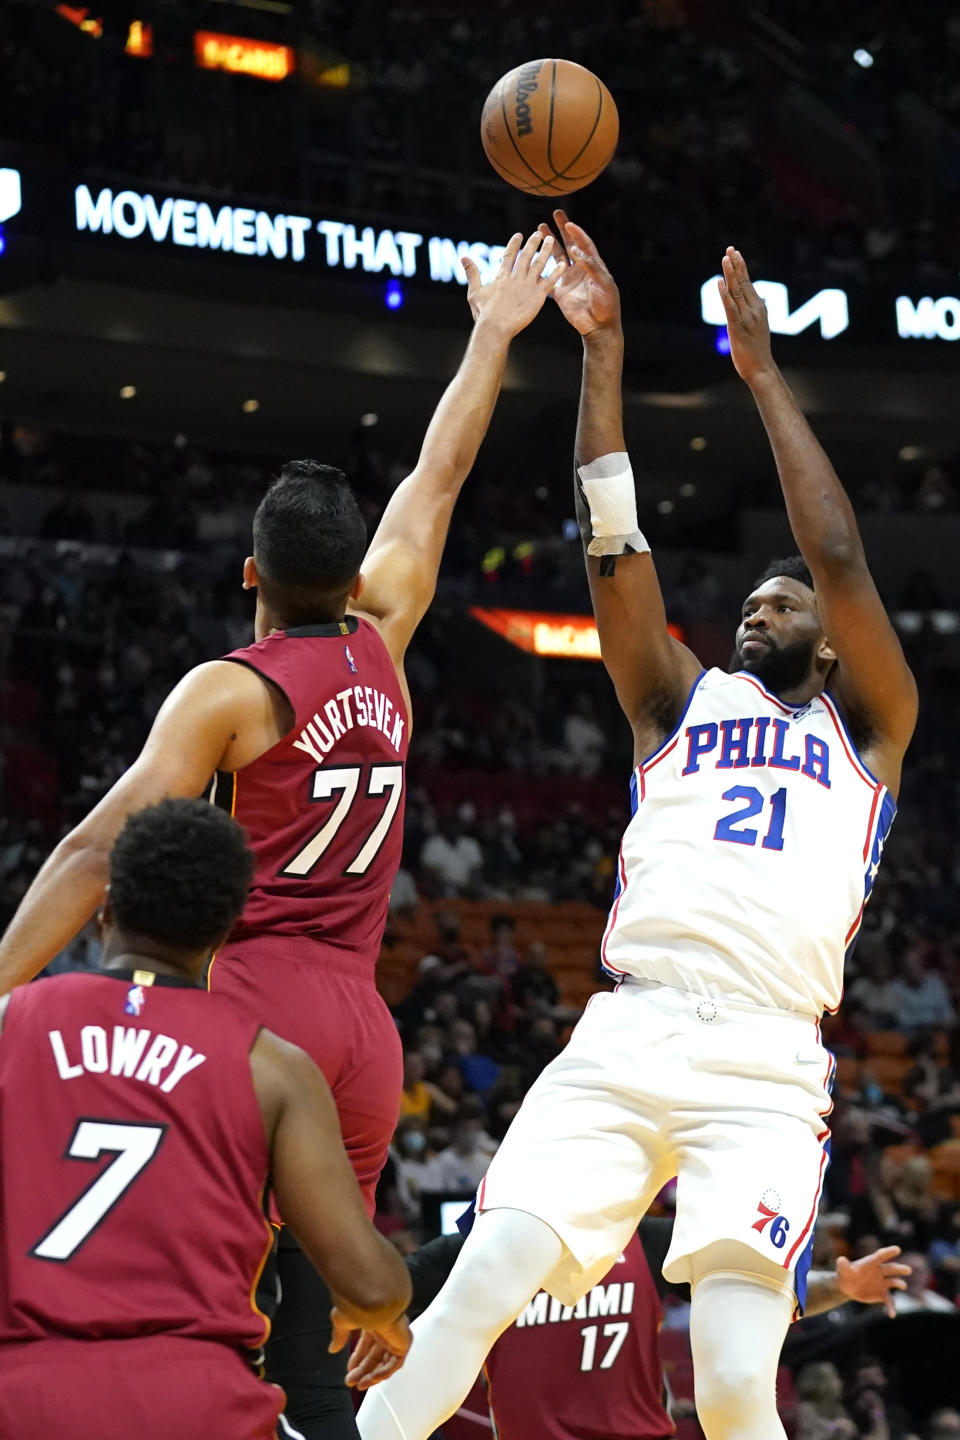 Philadelphia 76ers center Joel Embiid (21) shoots over Miami Heat center Omer Yurtseven (77) during the first half of an NBA basketball game, Saturday, Jan. 15, 2022, in Miami. (AP Photo/Lynne Sladky)